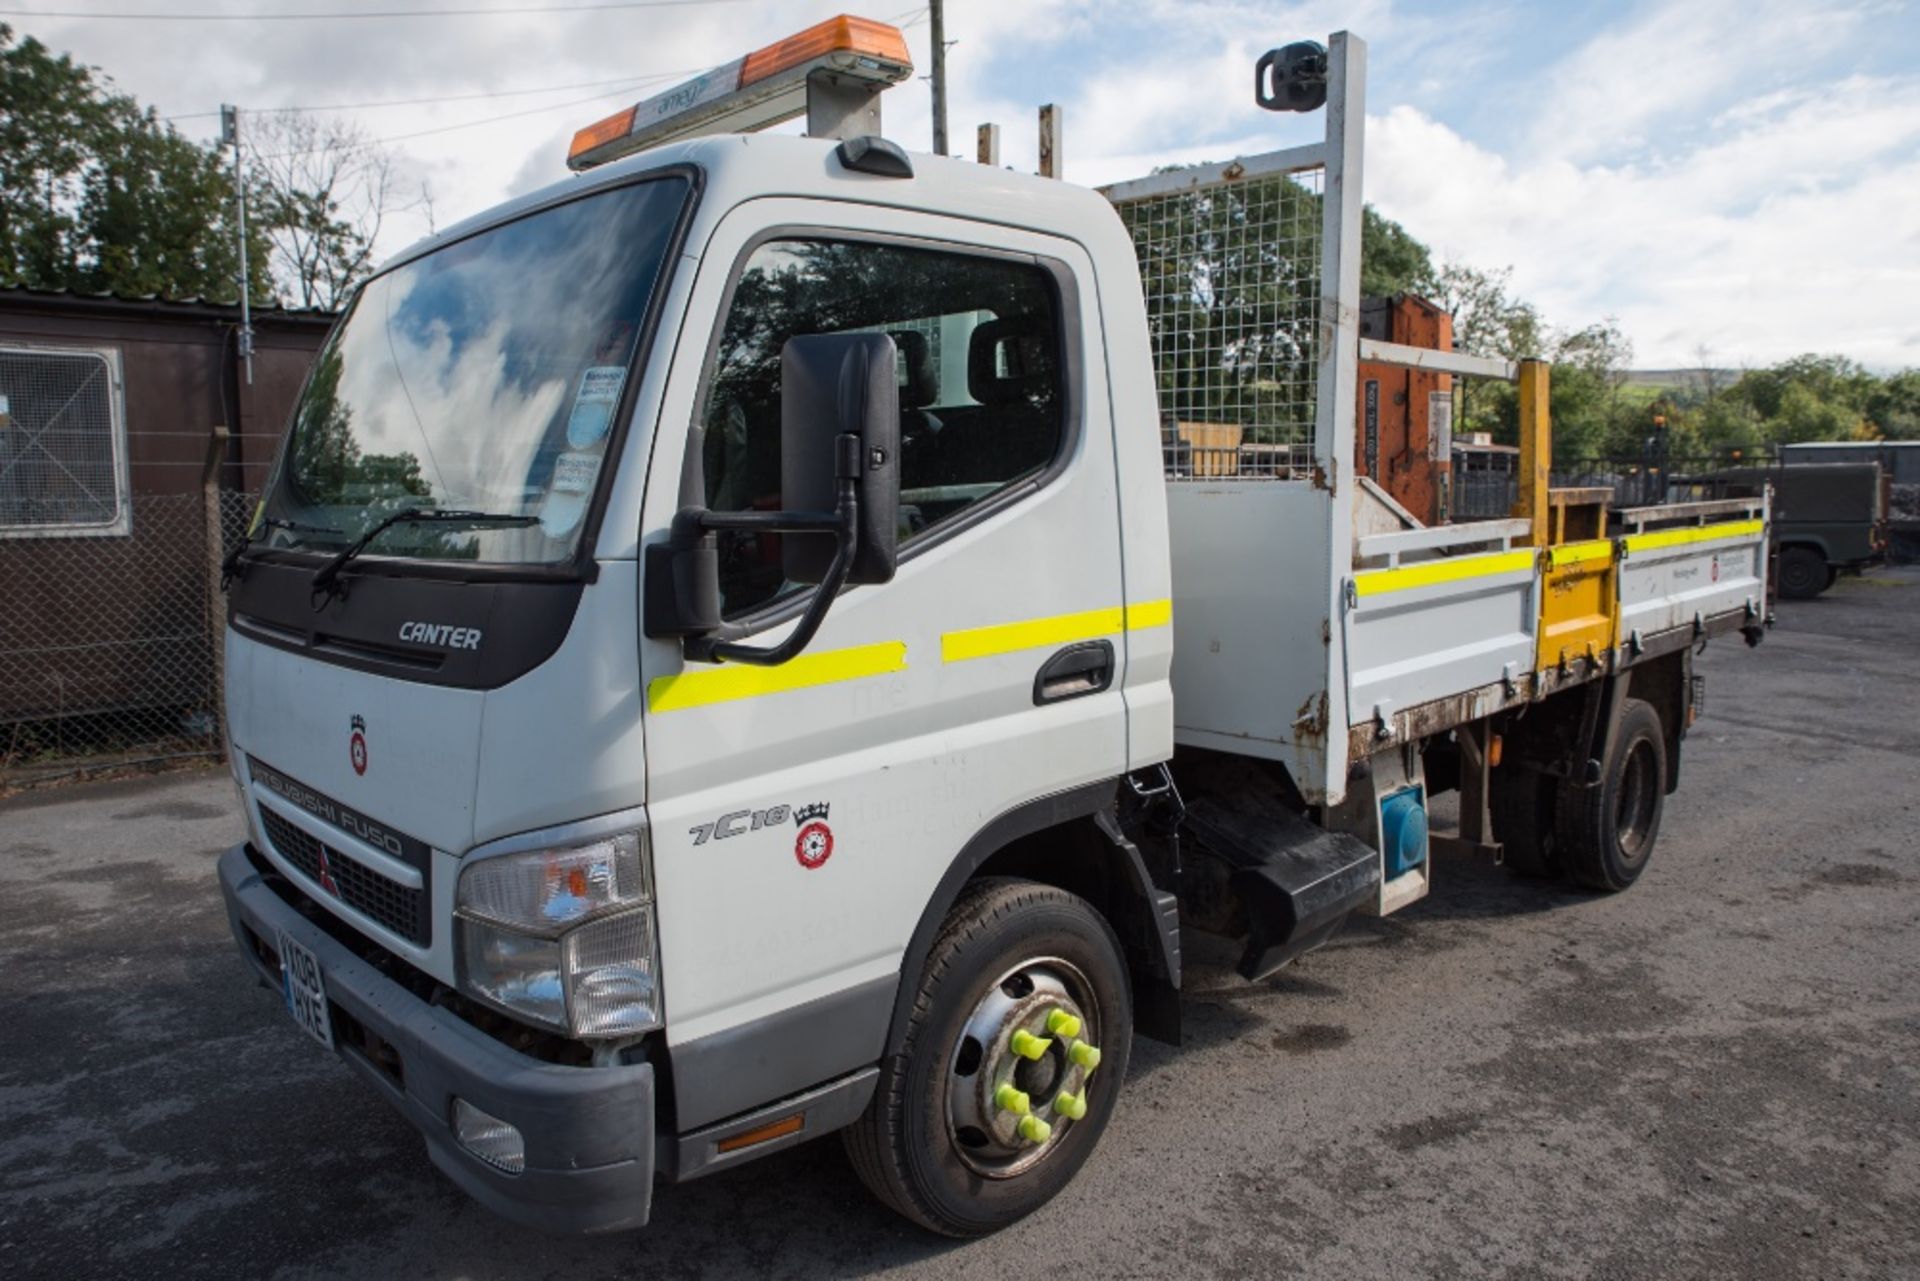 Mitsubishi Fuso 7C18 Canter 7.5 tonne tipper wagon
Registration Number: VX08 HXE
Date of - Image 2 of 7